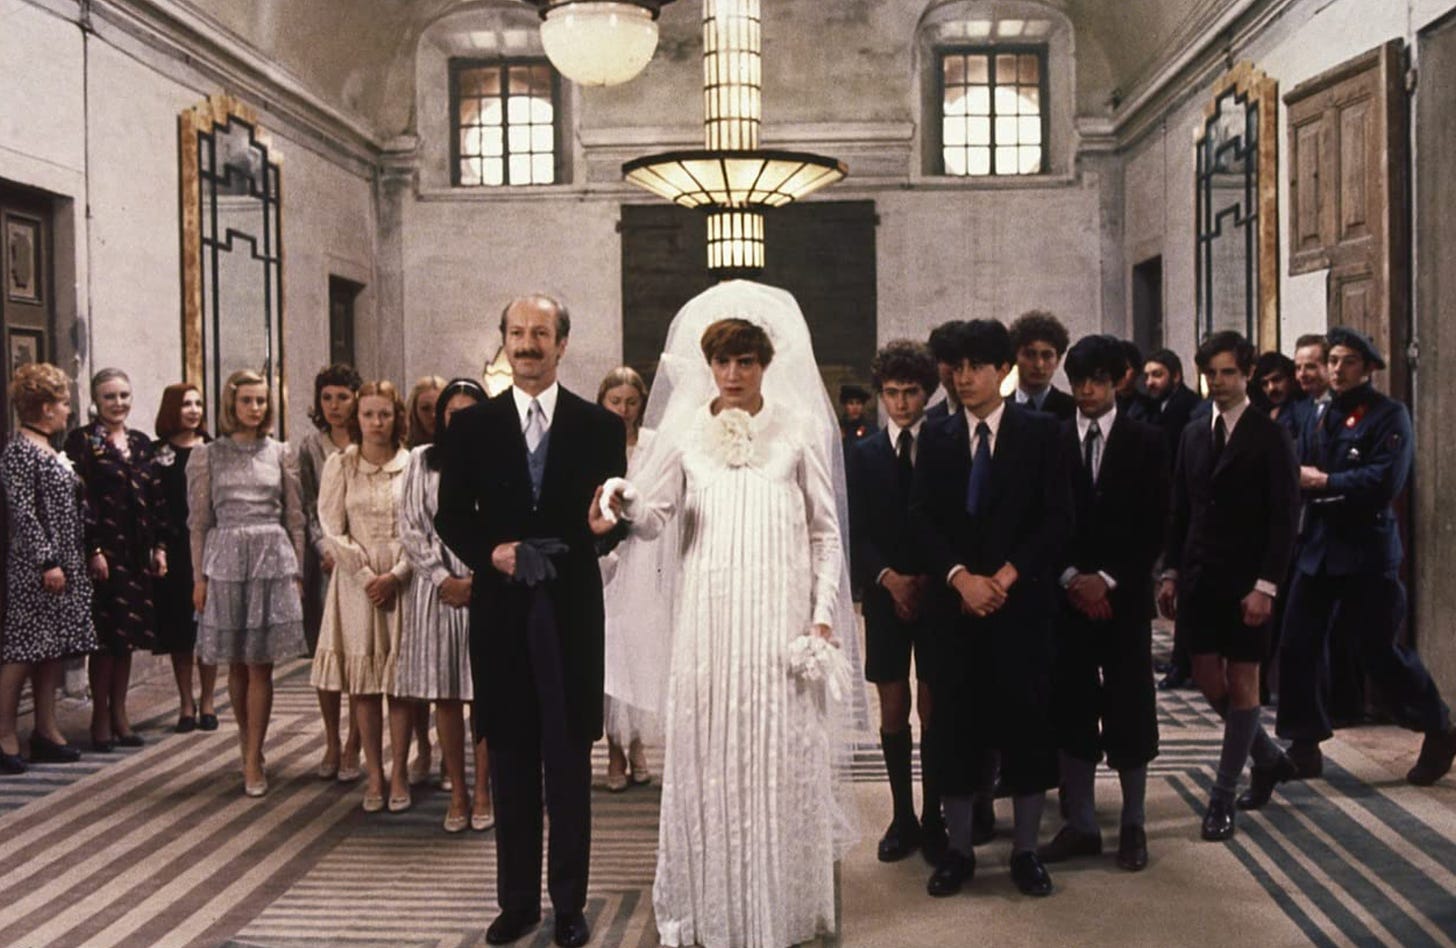 The mock wedding from Pasolini's "Salò, or the 120 Days of Sodom" (1975)